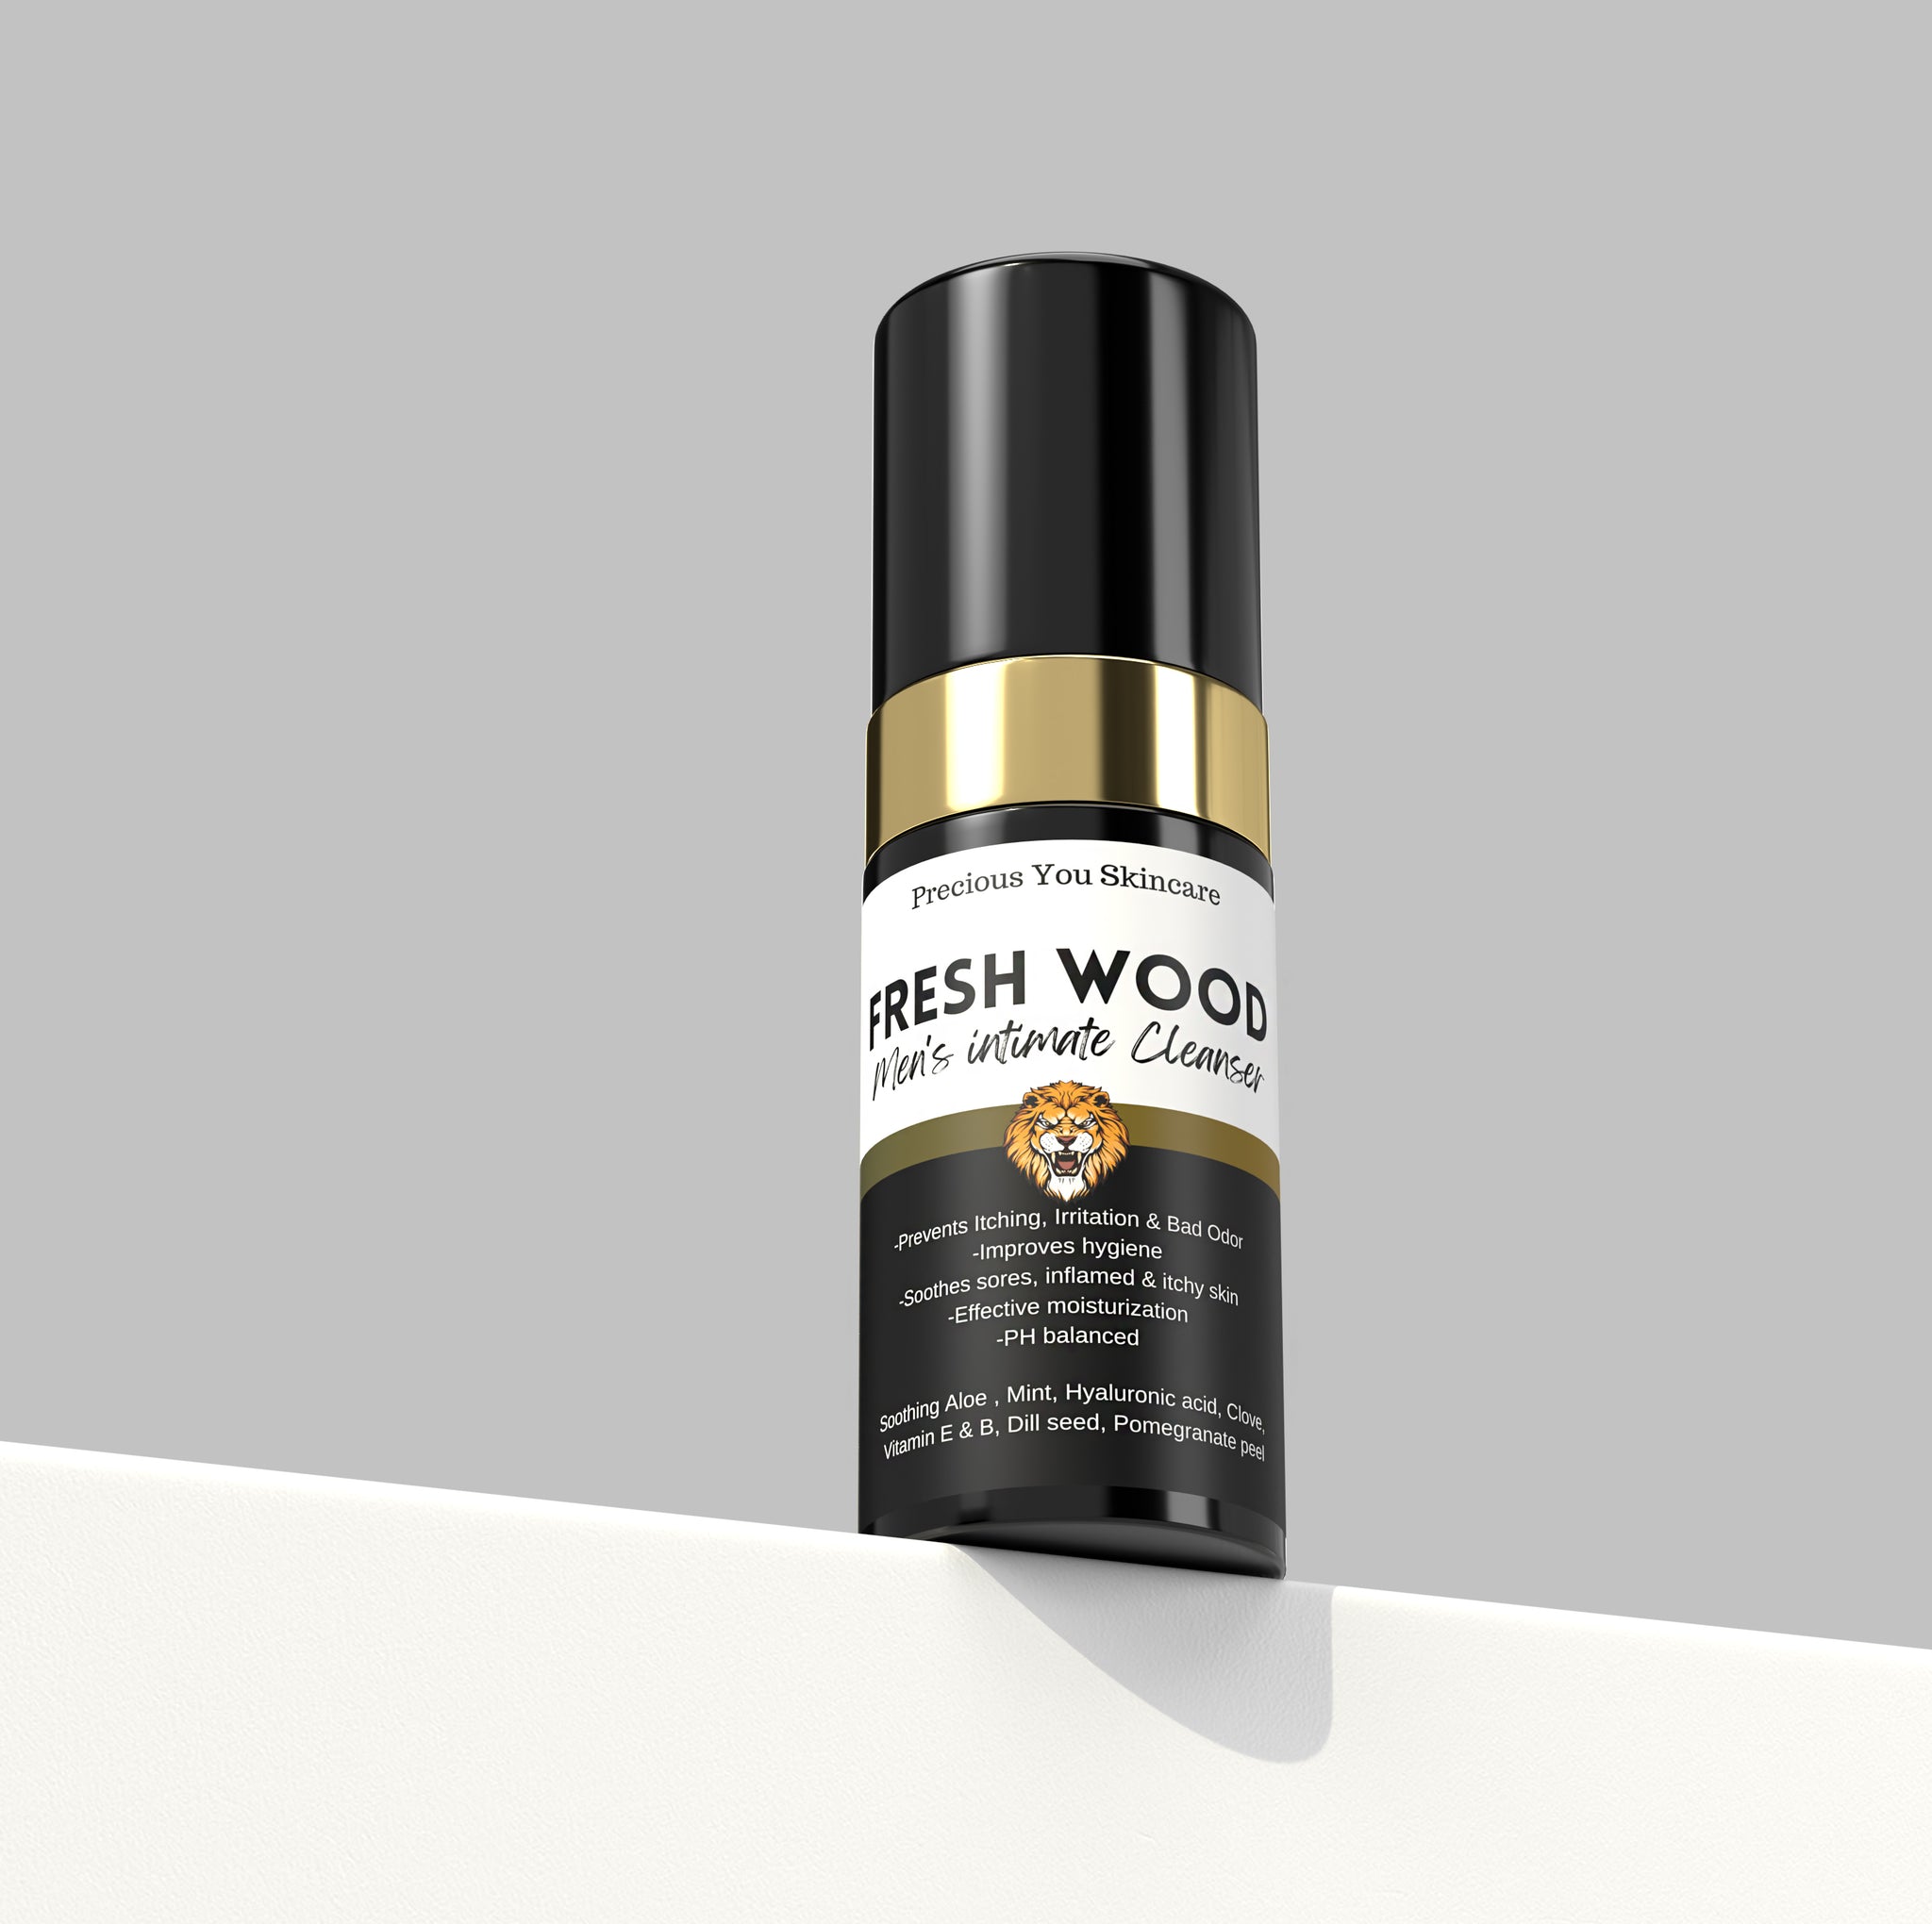 Fresh Wood intimate cleanser for men - Prevents Itching, Irritation & Bad Odor |